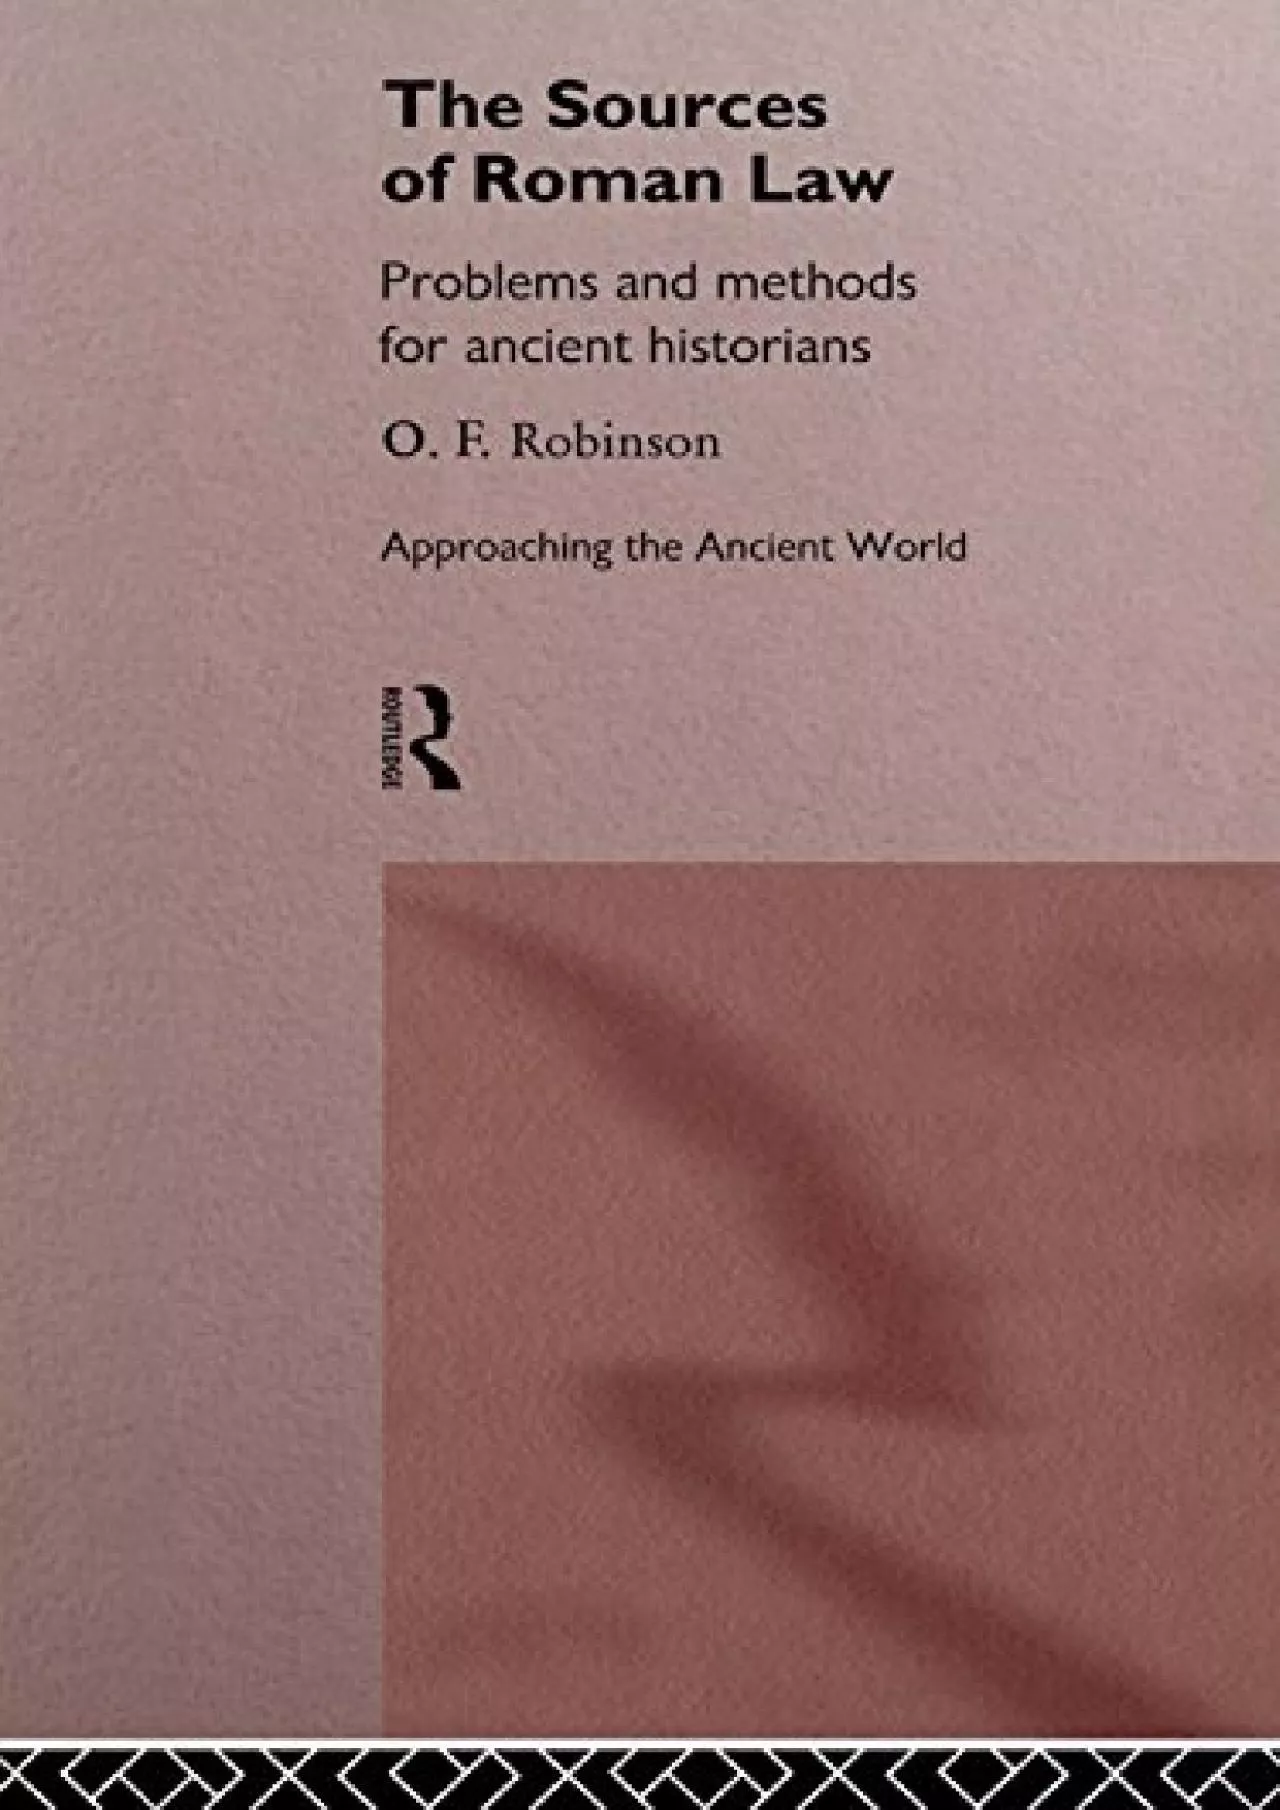 [BEST]-The Sources of Roman Law: Problems and Methods for Ancient Historians (Approaching